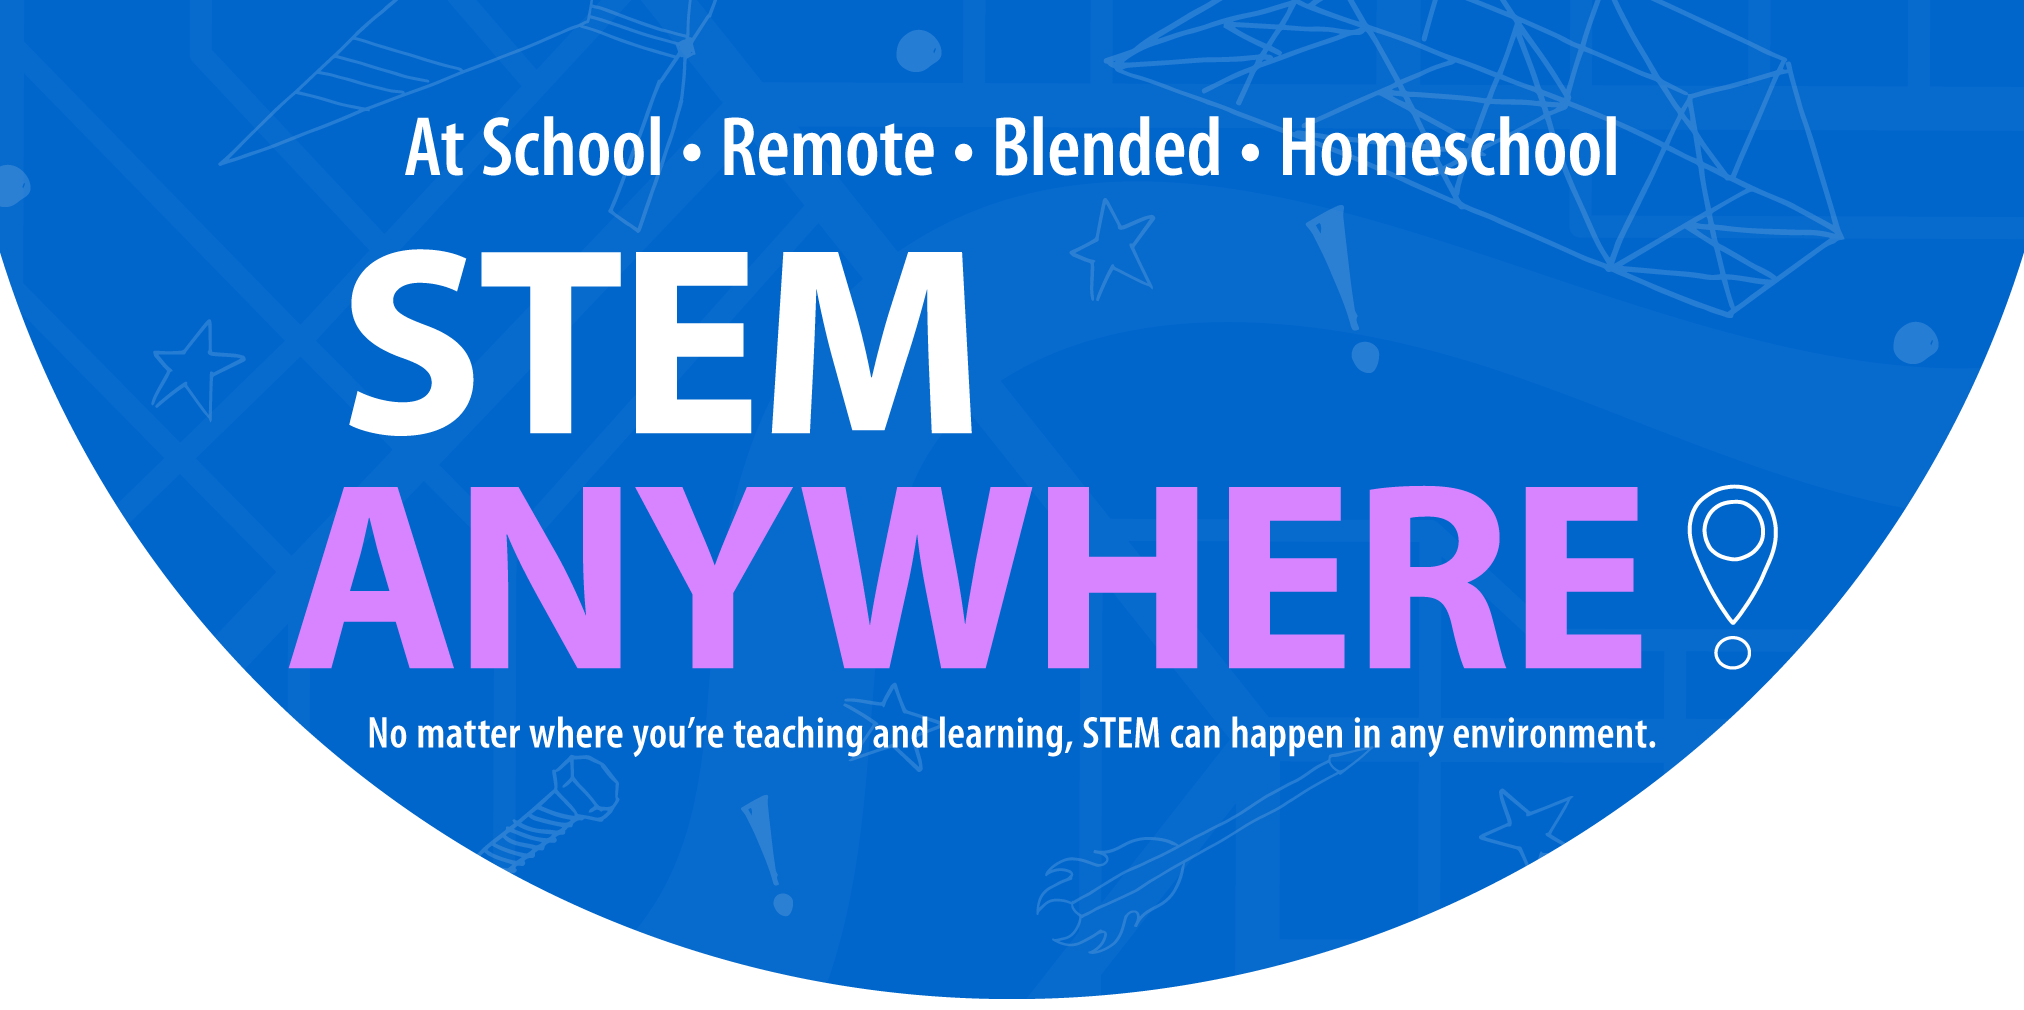 At School • Remote • Blended • Homeschool – STEM ANYWHERE! – No matter where you’re teaching and learning, STEM can happen in any environment.